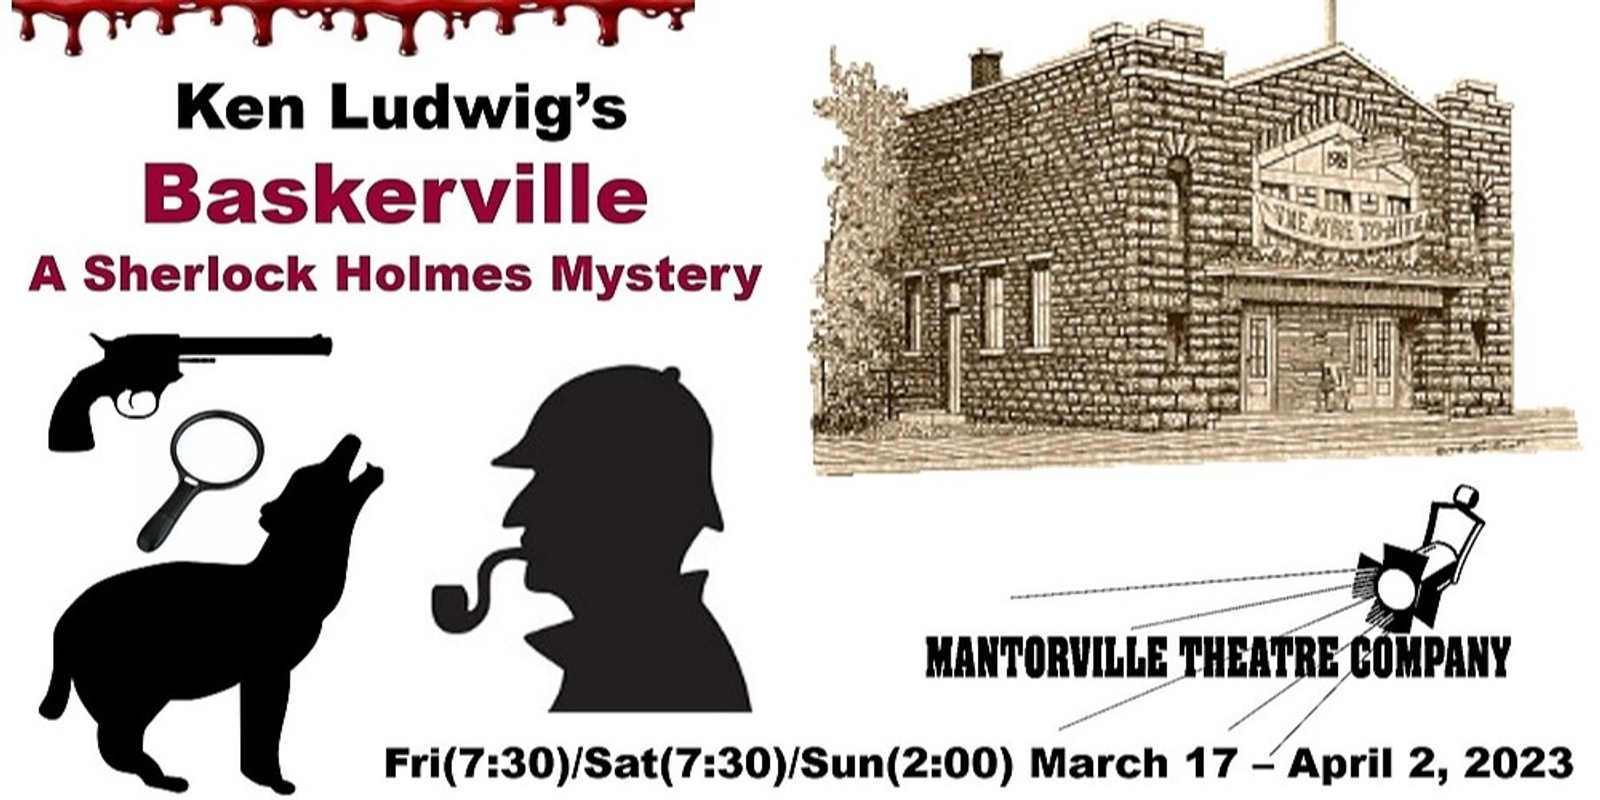 Baskerville - A Sherlock Holmes Mystery, by Ken Ludwig March 26th 2:00 p.m.